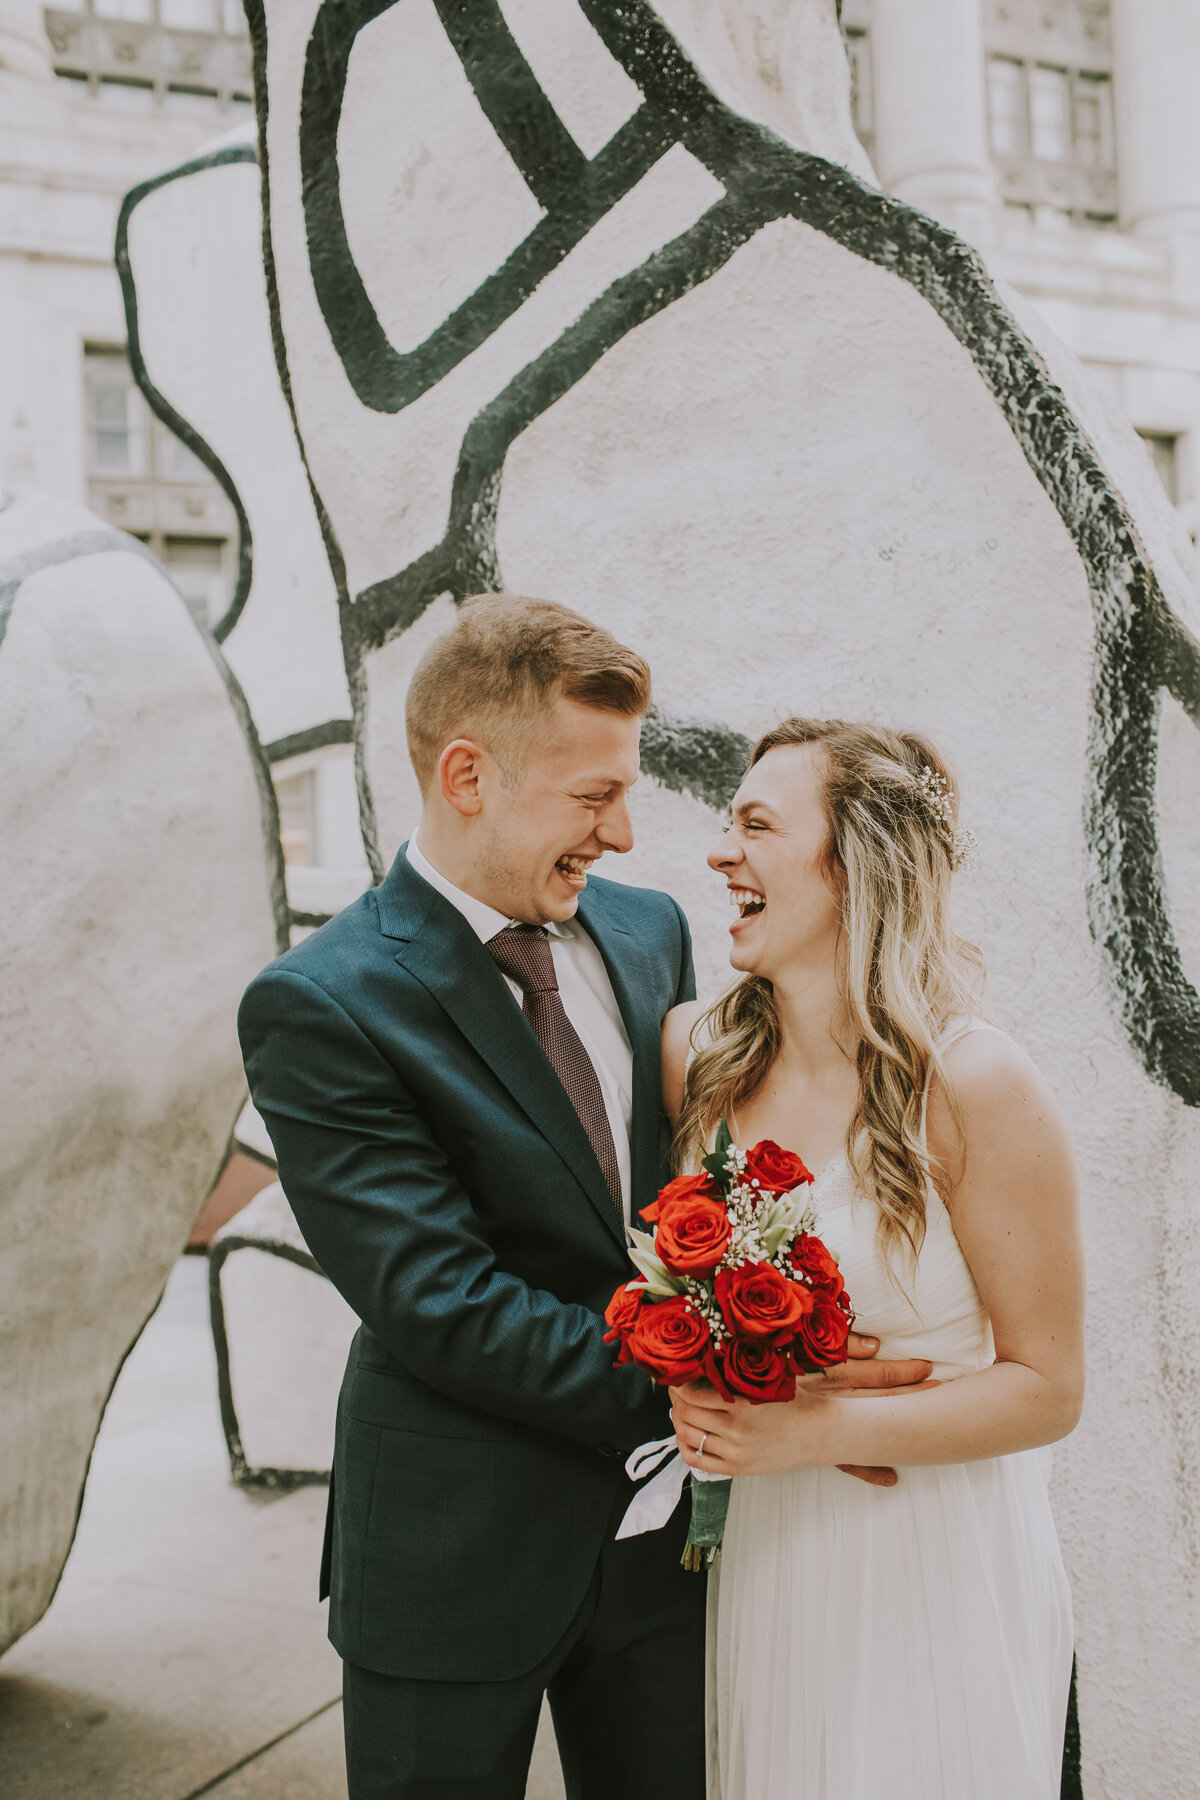 Emma & Vukasin Courthouse Wedding in Chicago March 2019 (52)